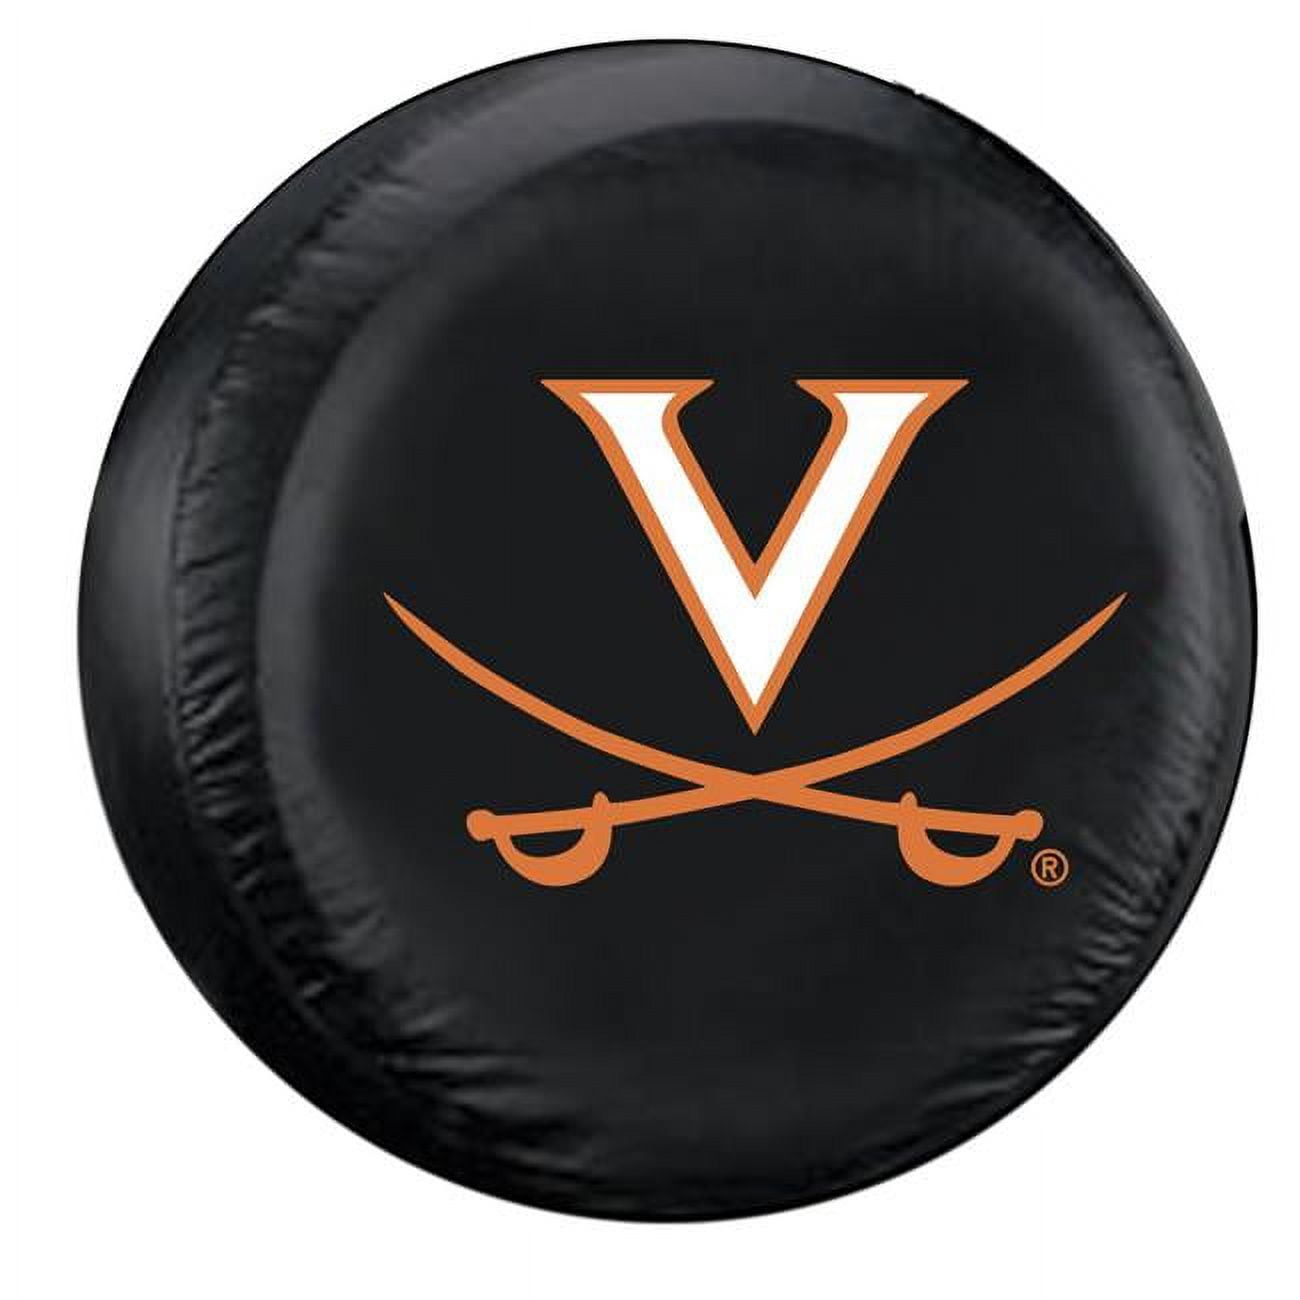 Picture of Fremont Die 2324558369 Virginia Cavaliers Tire Cover, Black - Large